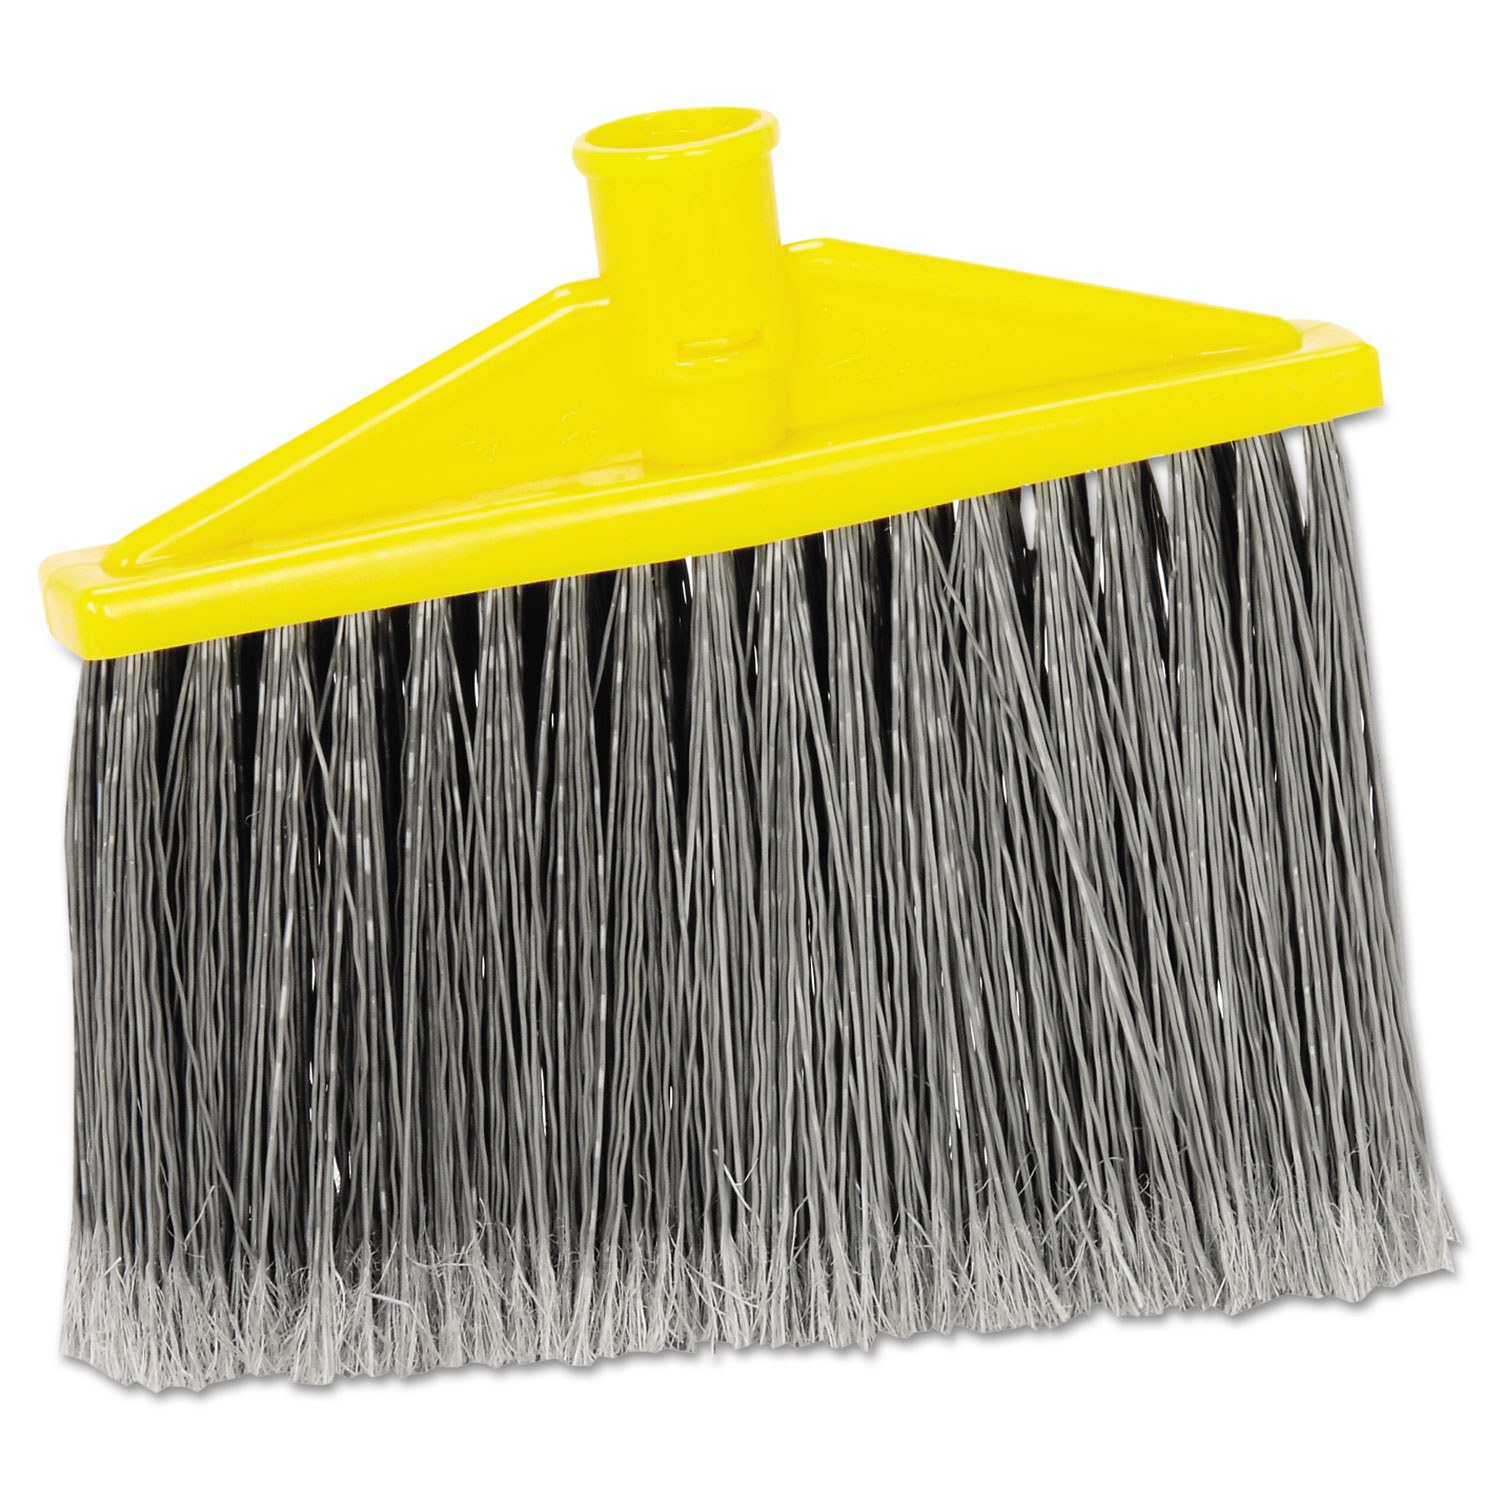  Rubbermaid Commercial FG639700GRAY Replacement Broom Head, 10 1/2 (RCP6397EA) 